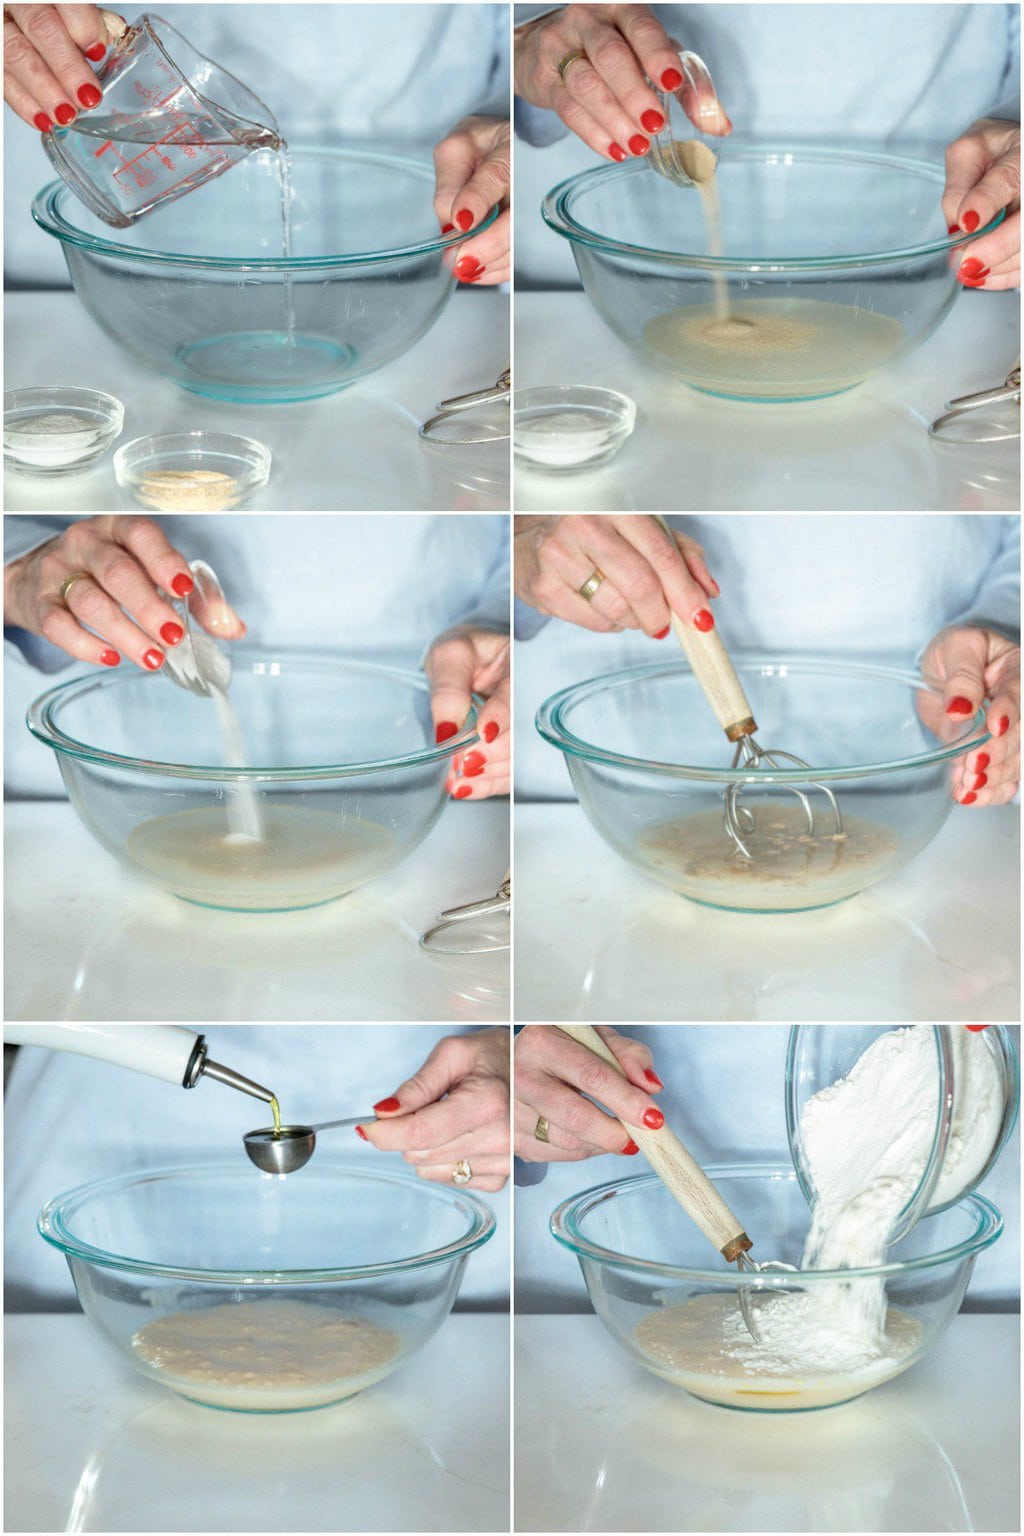 Step-by-step photo collage of how to make Easy Deep Dish Pizza Dough.